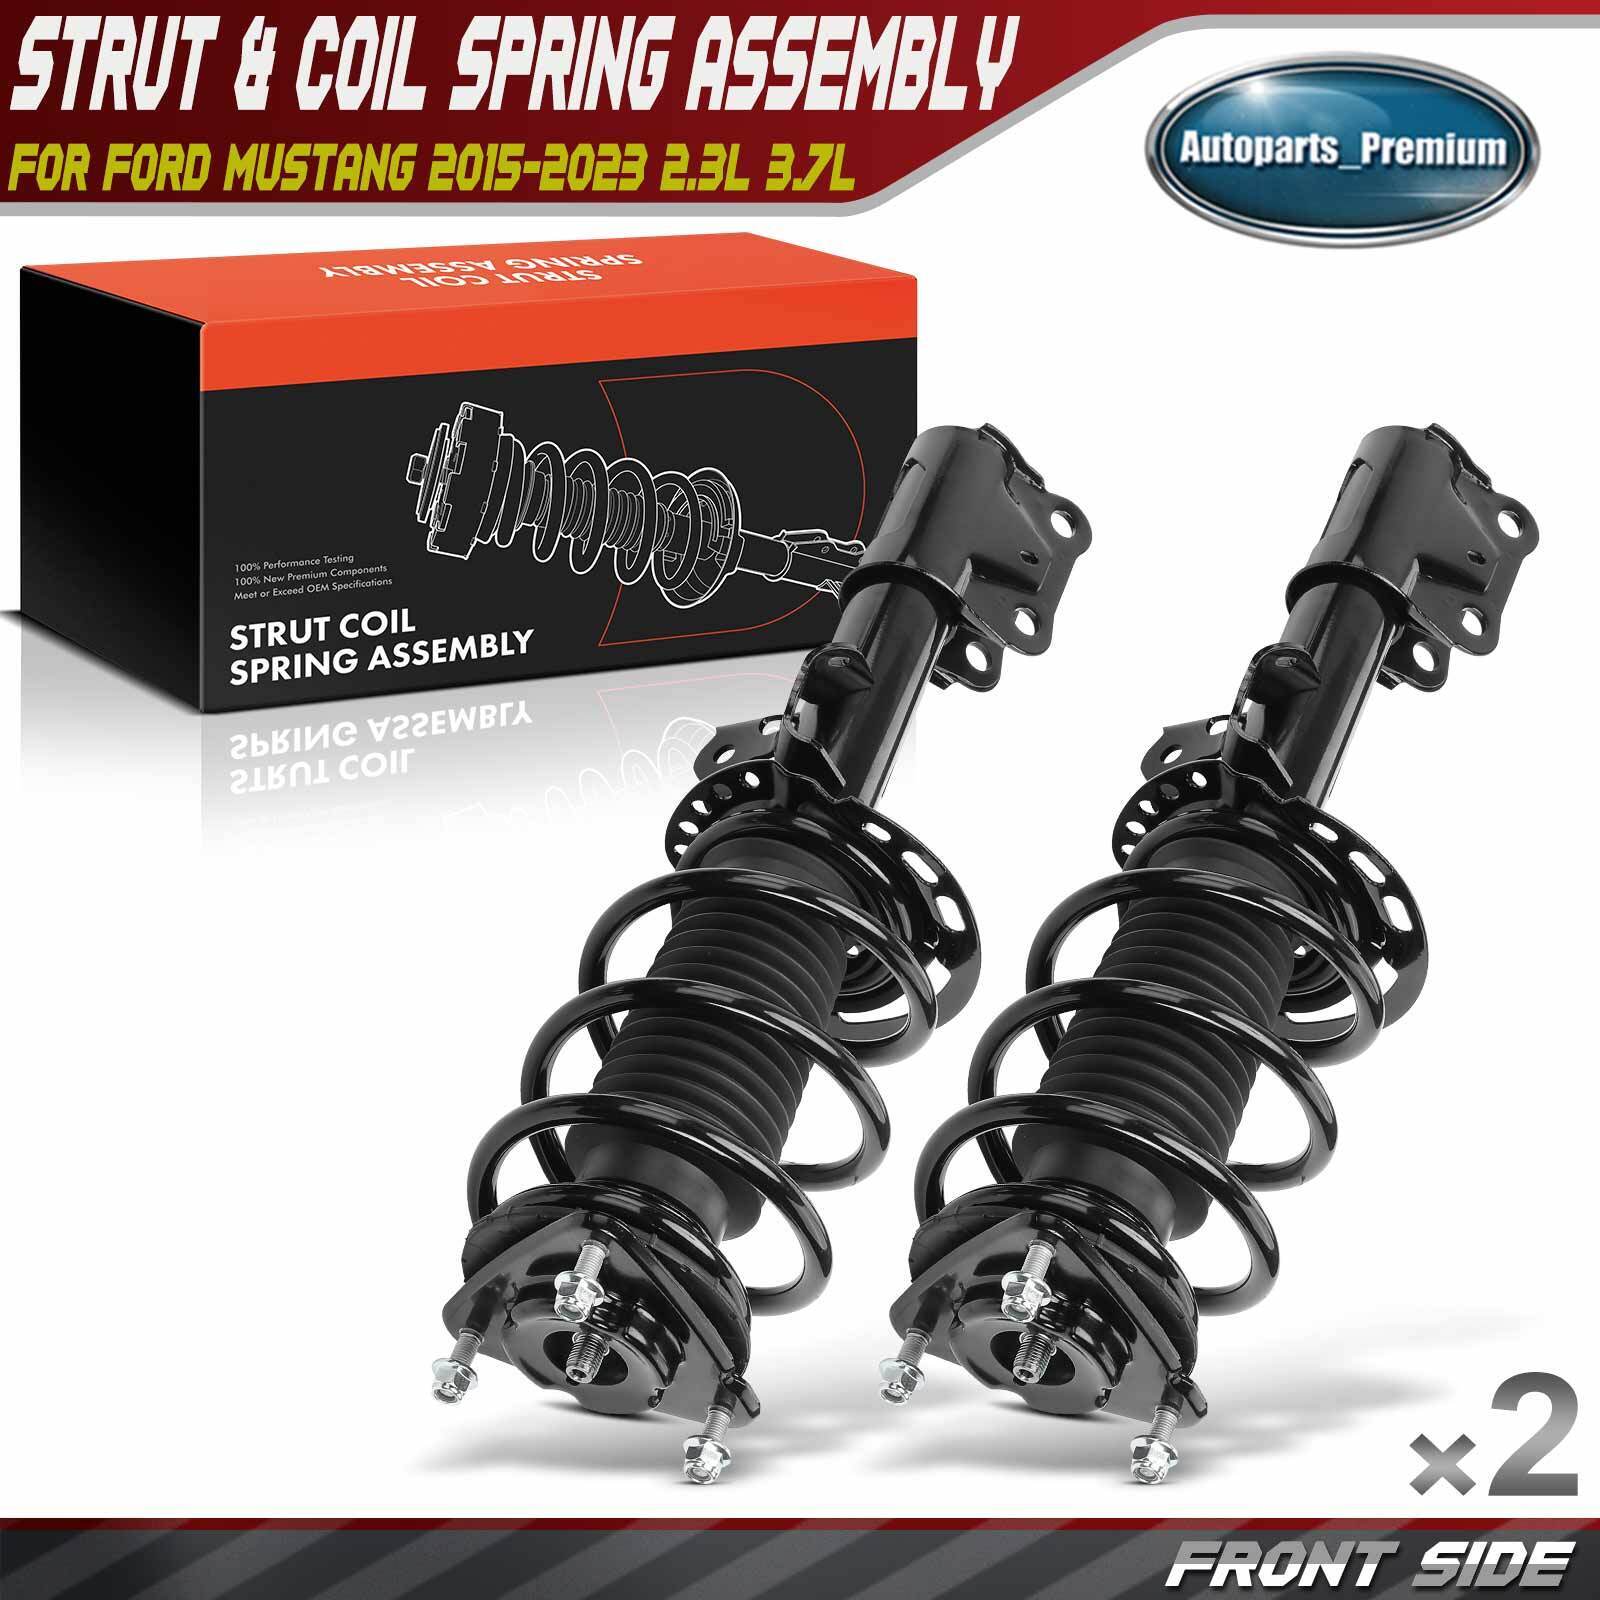 Front Complete Strut & Coil Spring Assembly for Ford Mustang 2015-2023 2.3L 3.7L